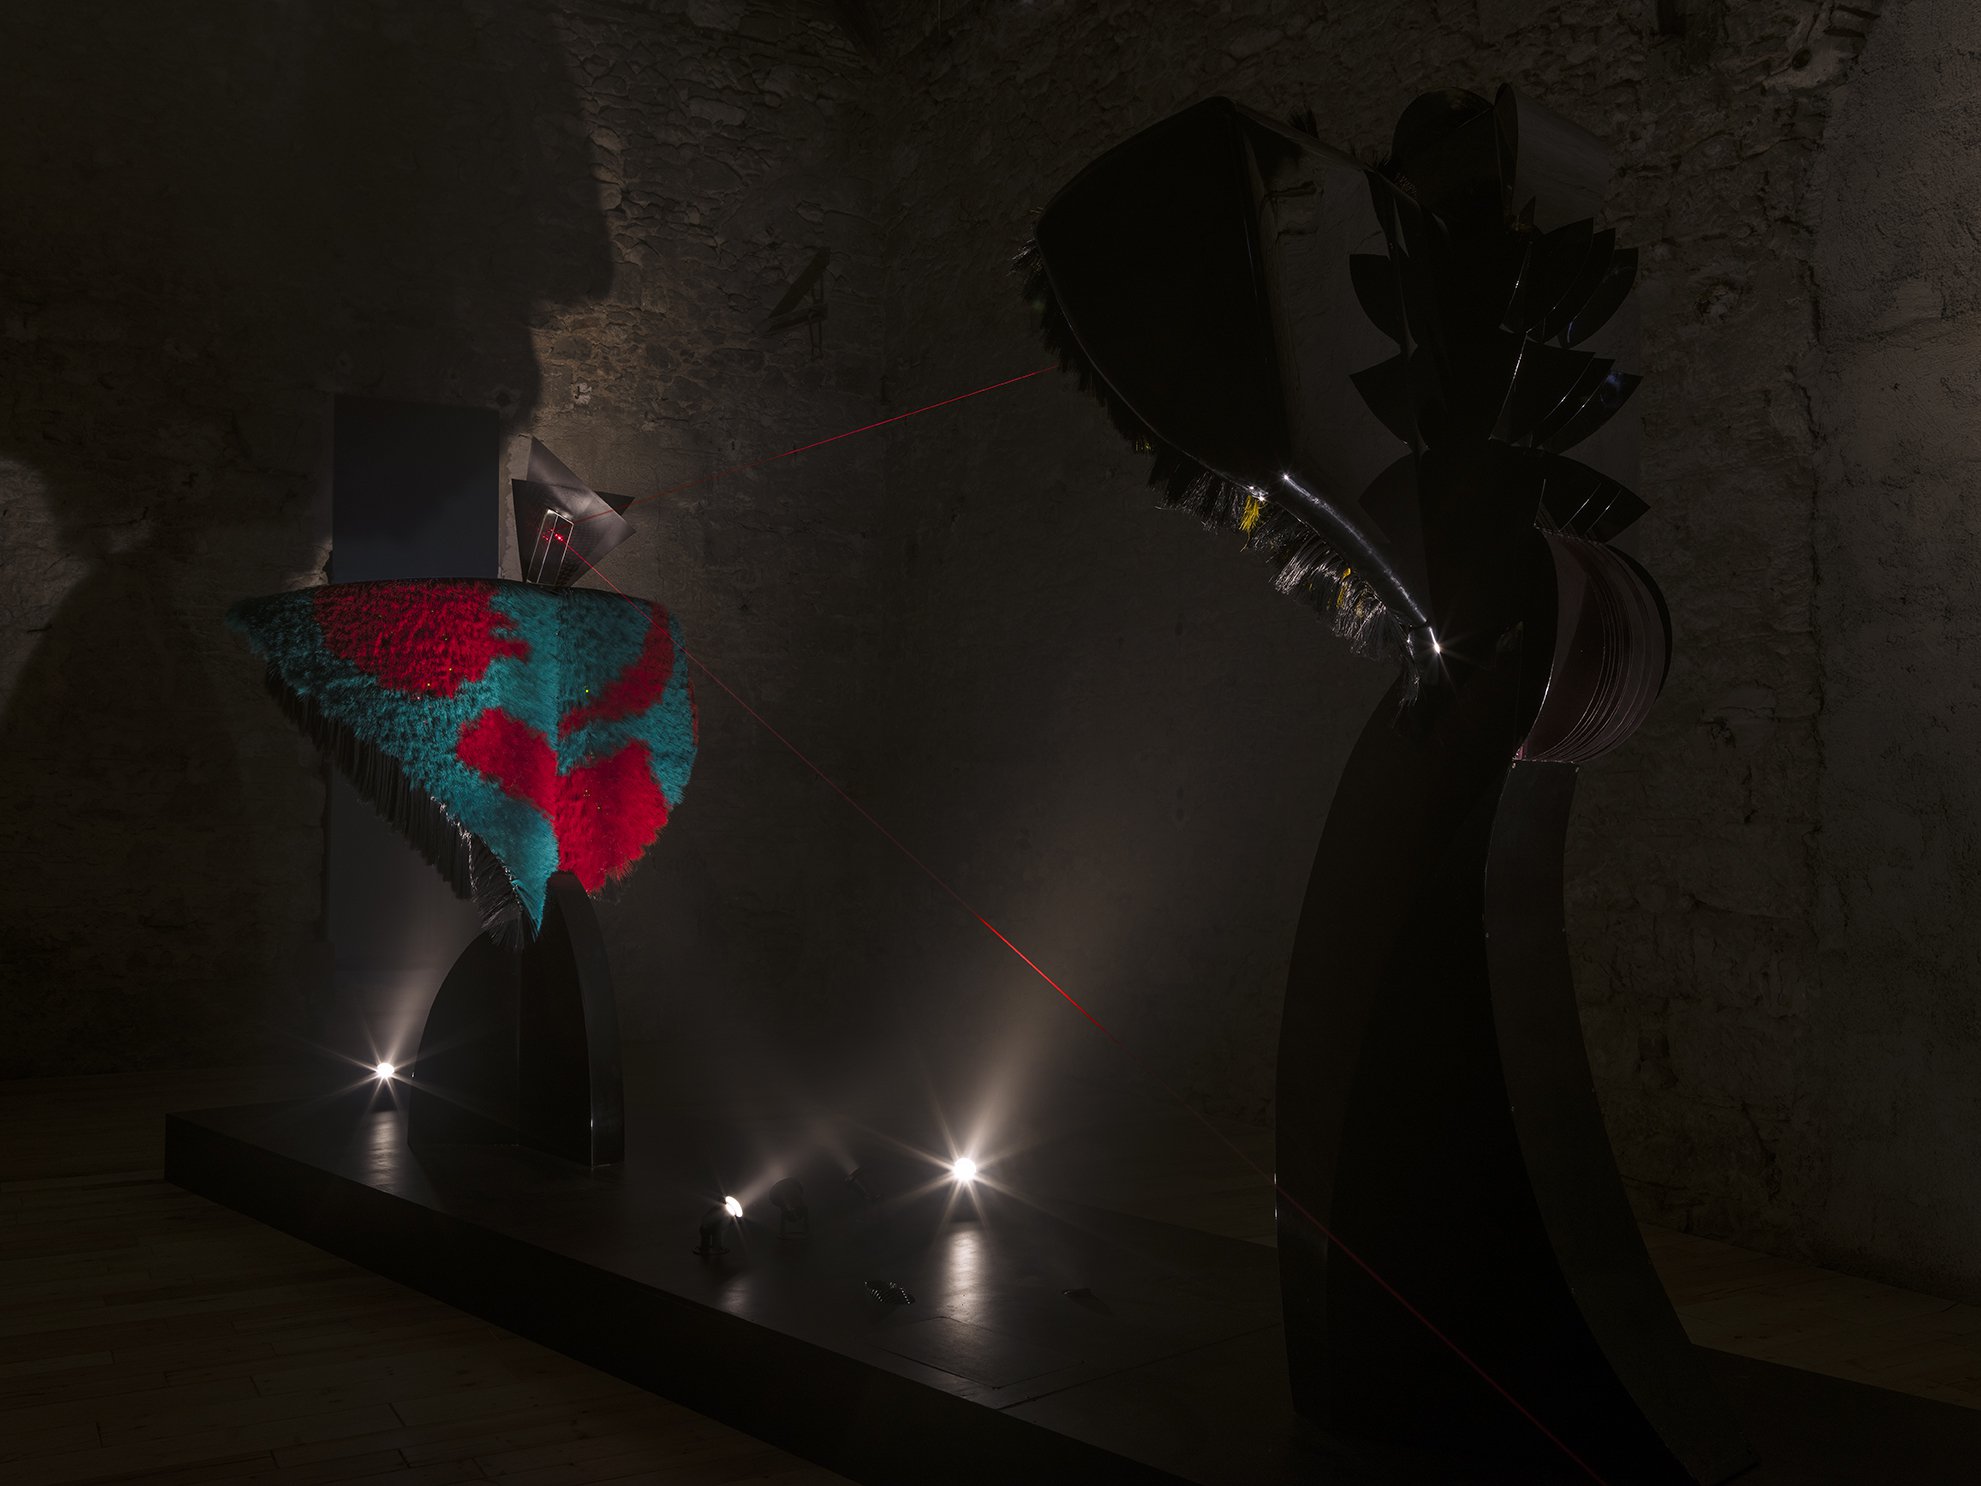 Liliane Lijn, Conjunction of Opposites: Woman of War and Lady of the Wild Things, installation of two mixed media performing sculptures, 1986. Installation view, Cosmic Dramas, Rodeo, Piraeus, 2018